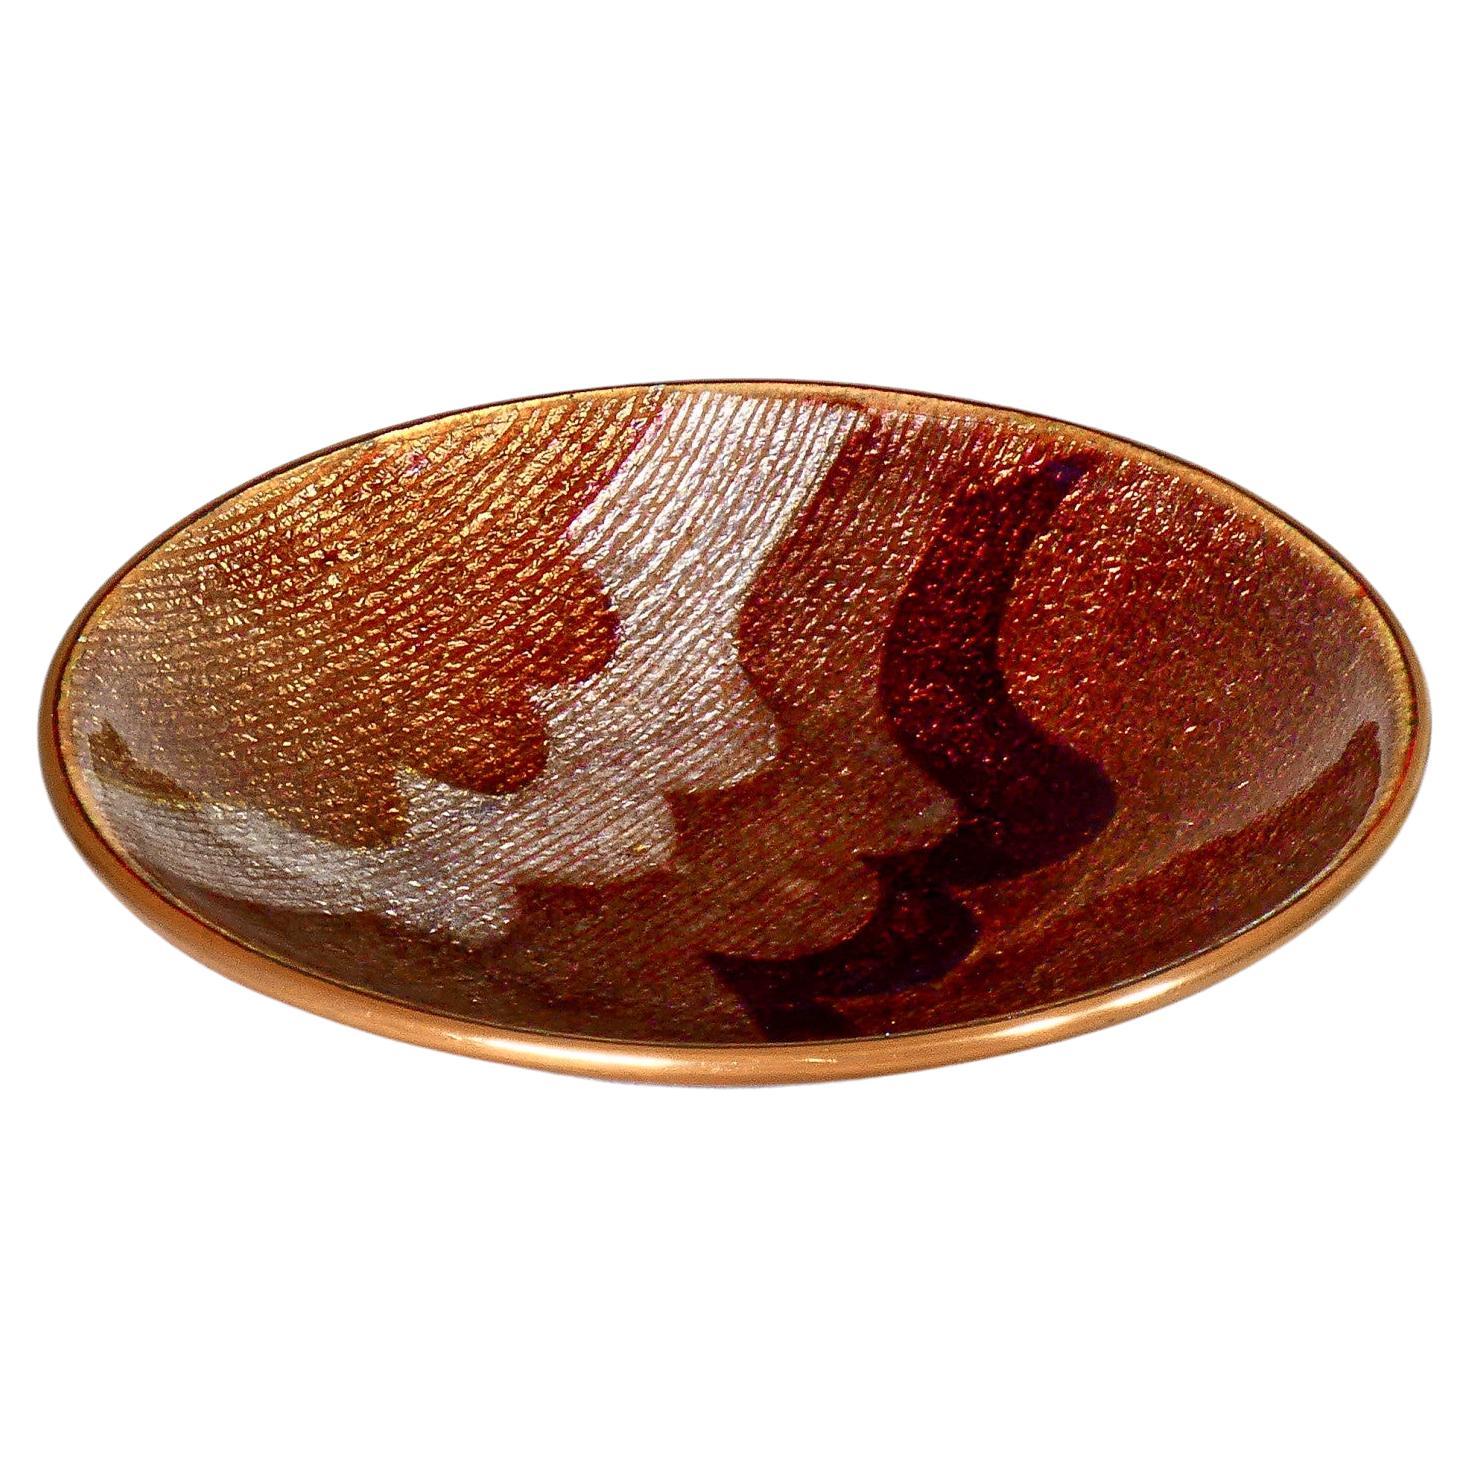 ‘Del Campo’ Pocket-Emptier Plate in Enameled Copper, Italy, 1950s